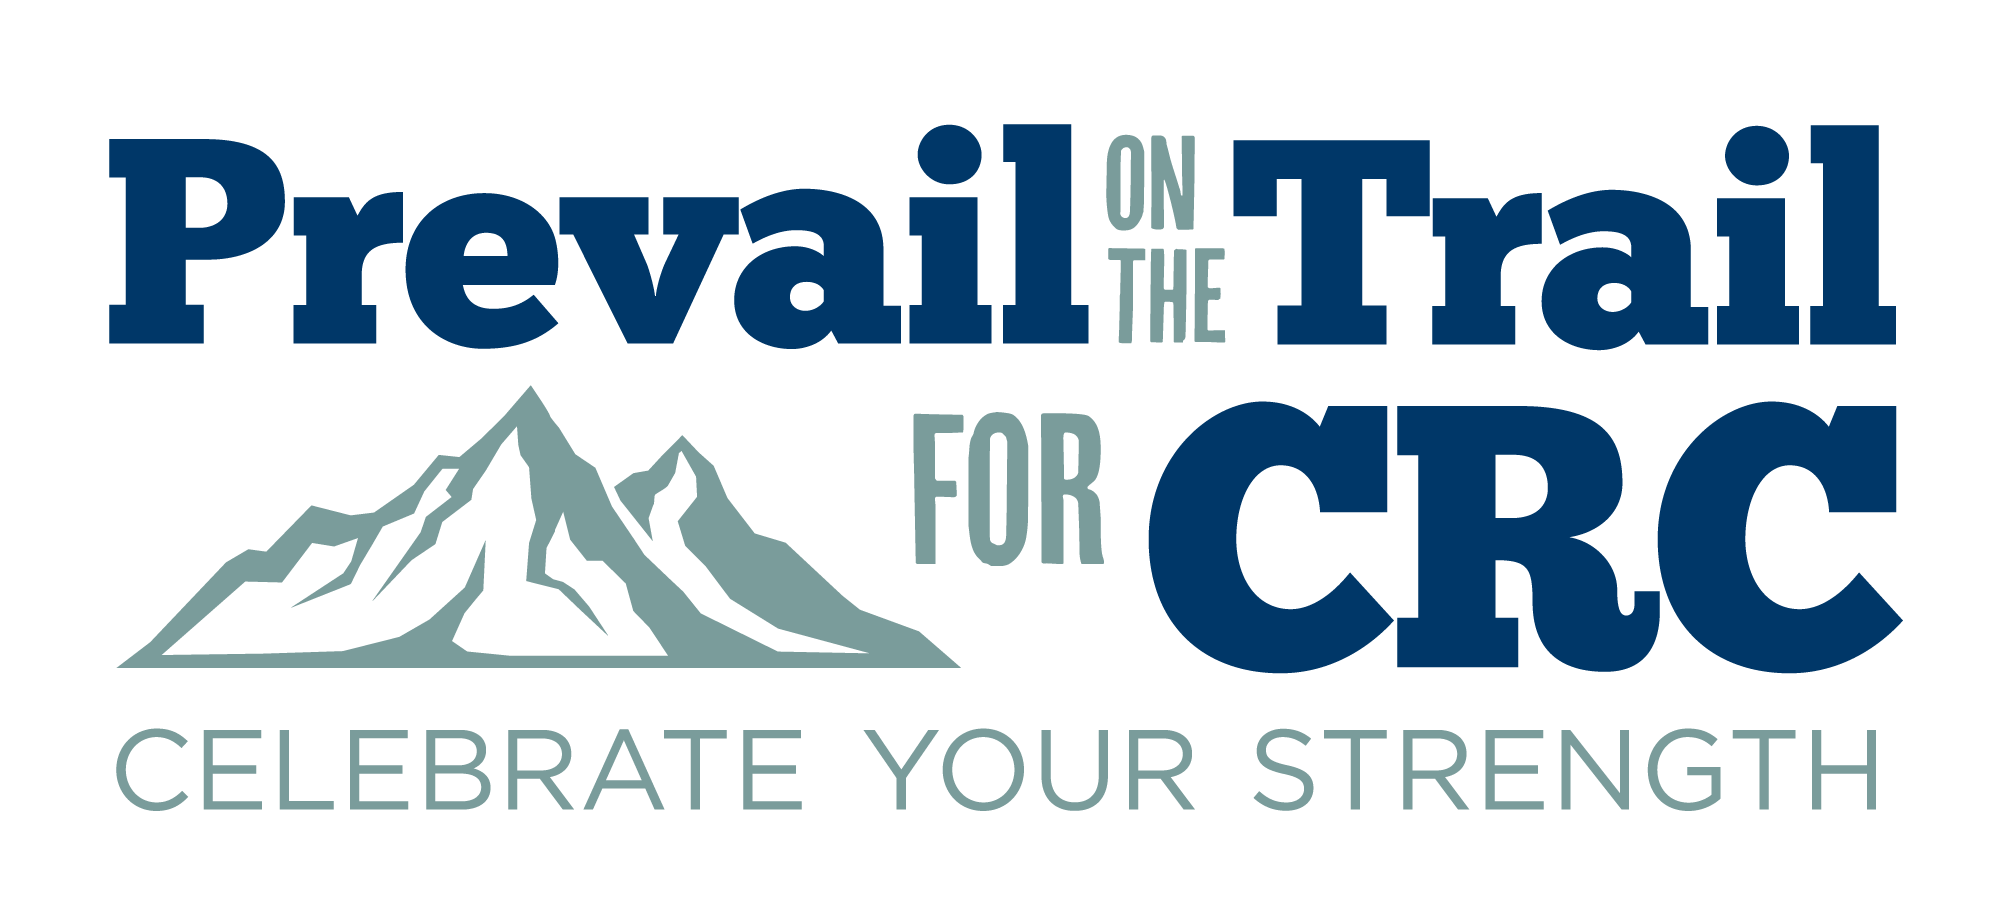 Prevail on the Trail logo